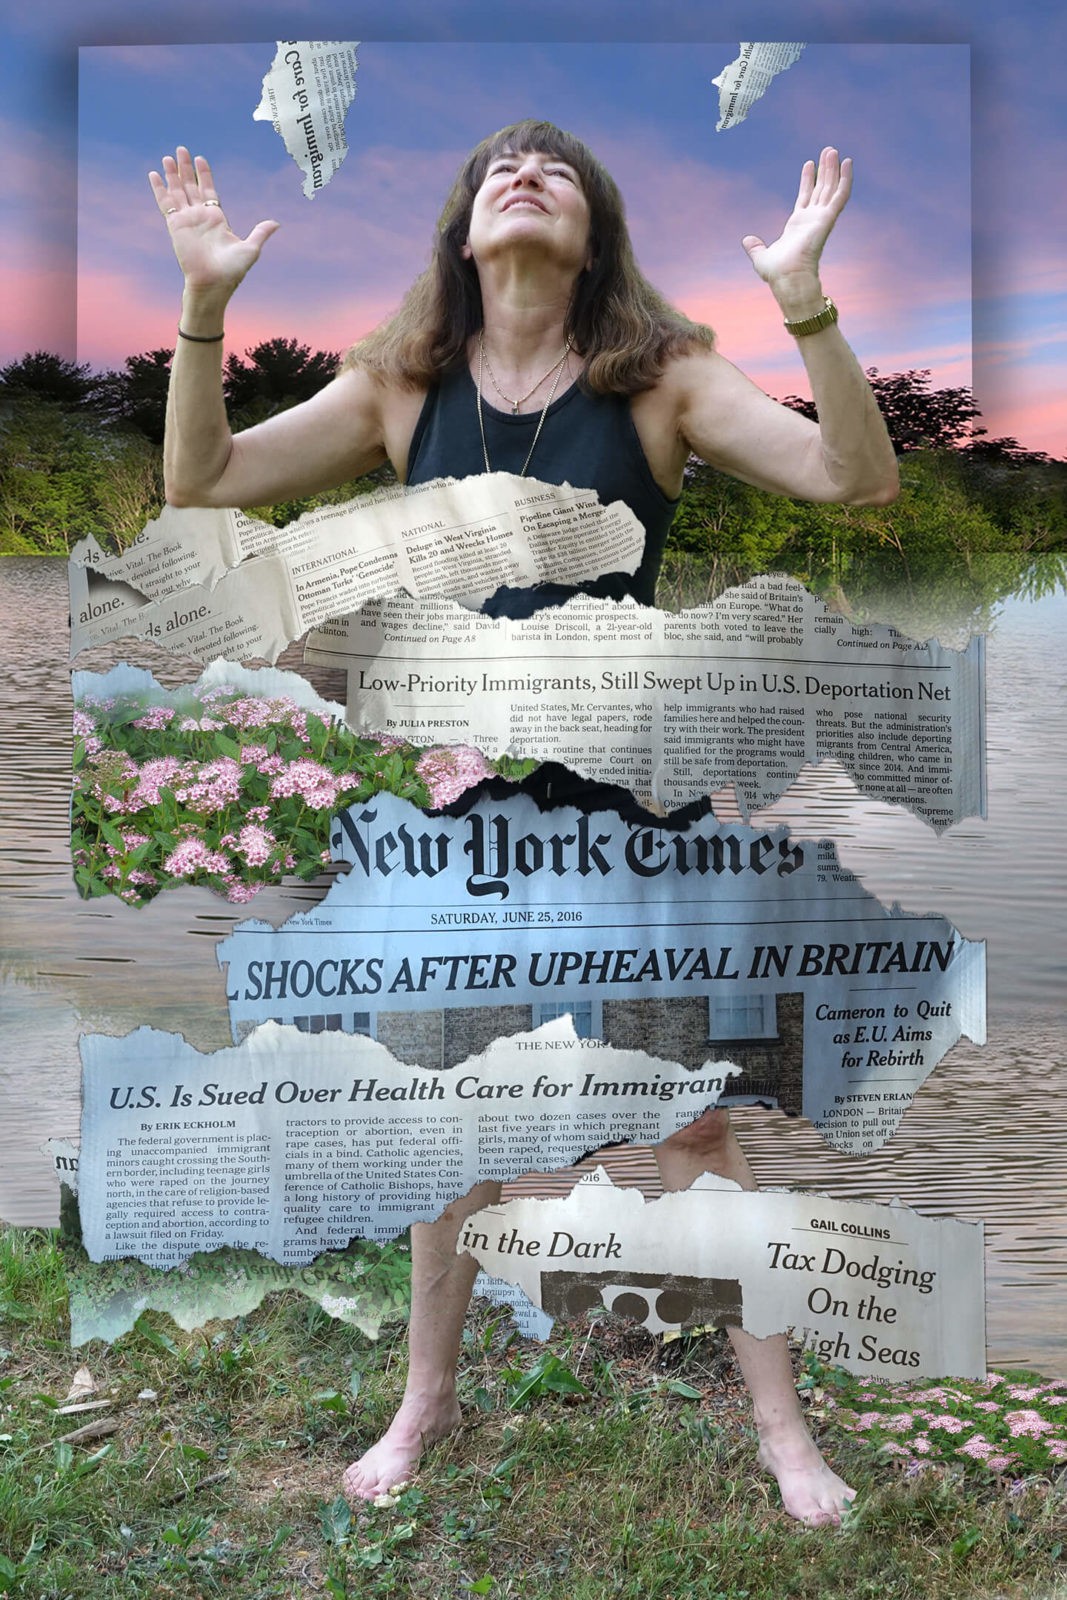 Robin Botie of Ithaca, New York, takes time out from gardening to photoshop headlines of global changes.